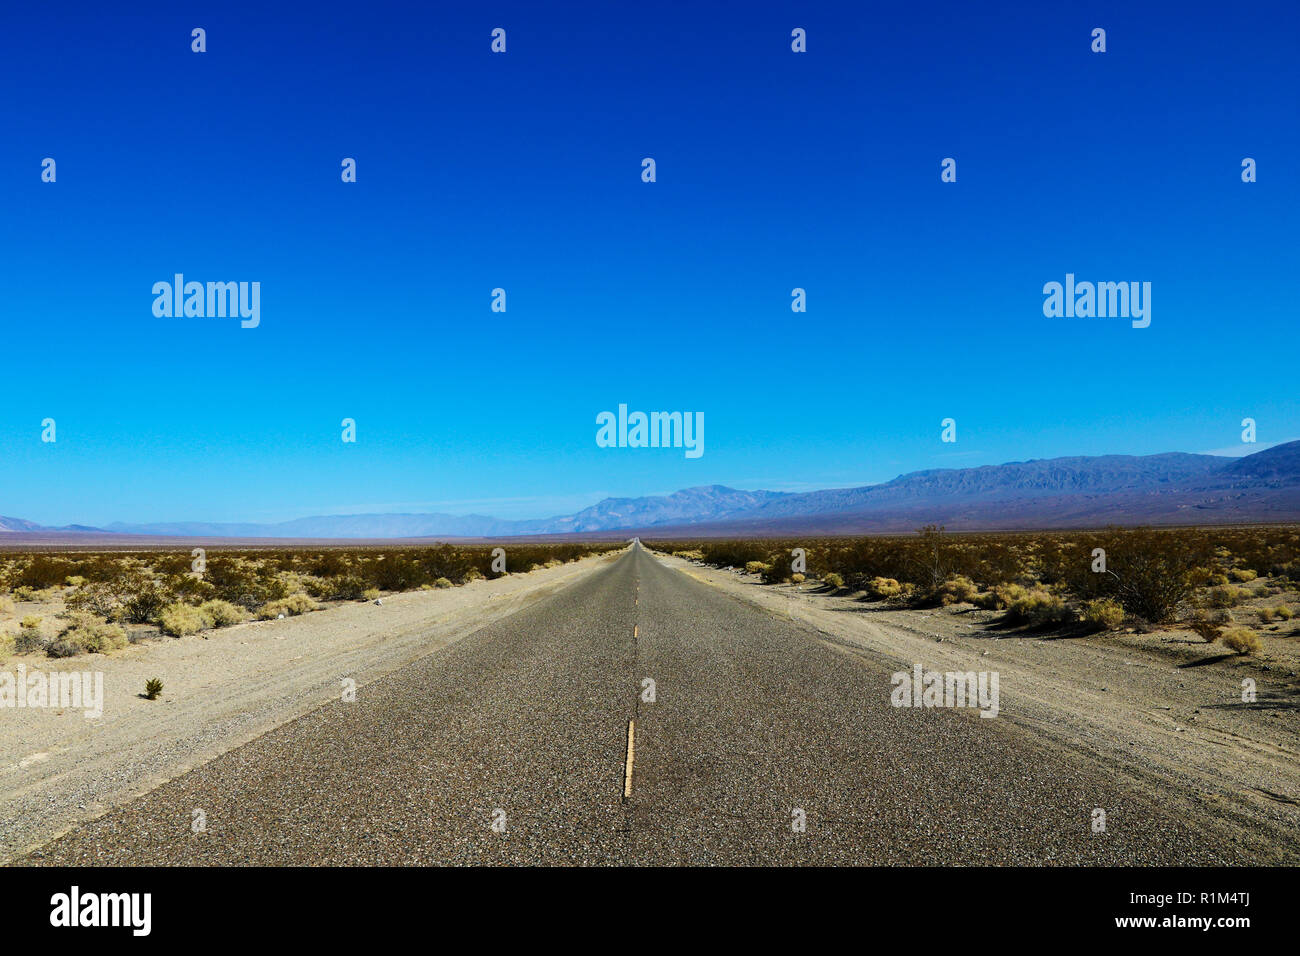 Classic panorama view of an endless straight road running through the barren scenery of the American Southwest with extreme heat haze on a beautiful s Stock Photo